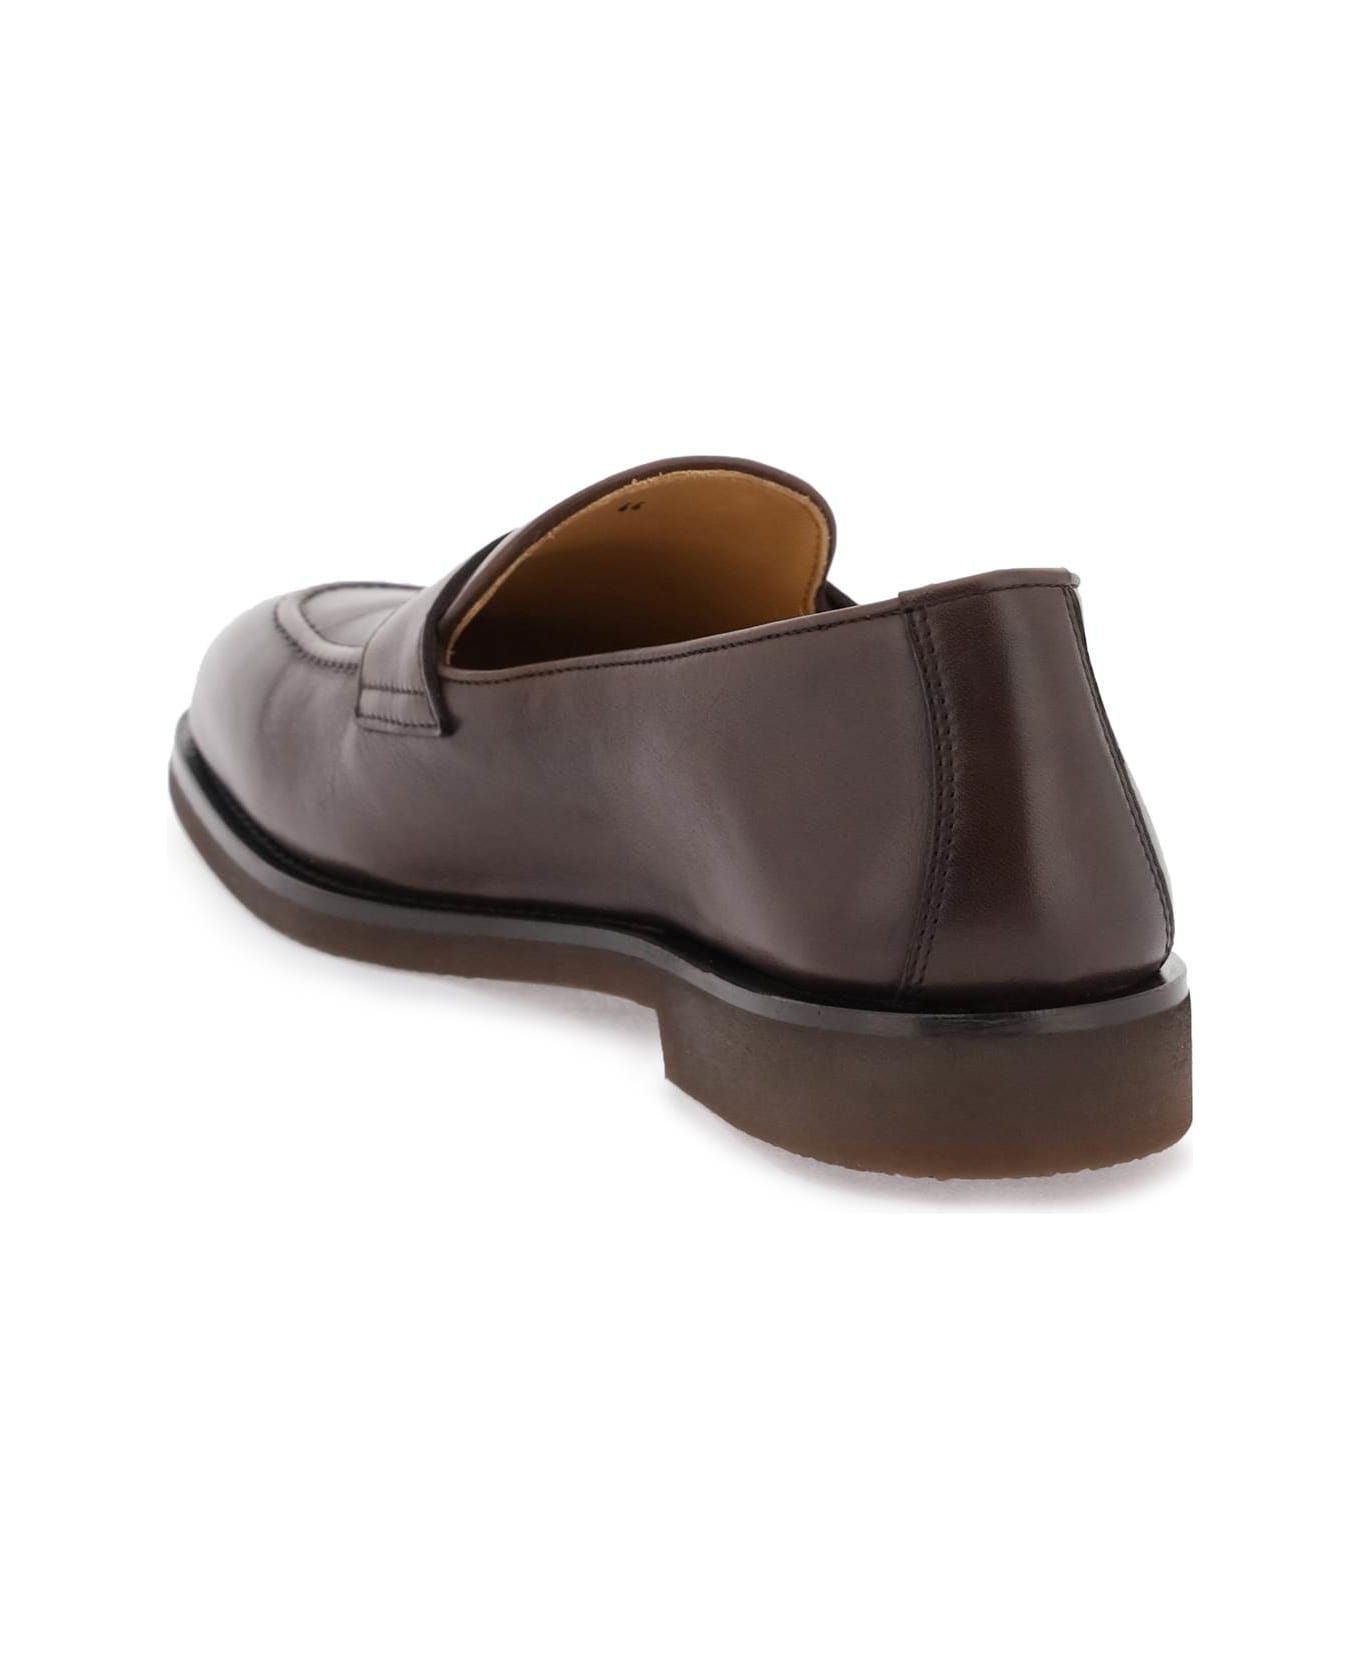 Brunello Cucinelli Leather Penny Loafers - ESPRESSO (Brown) ローファー＆デッキシューズ